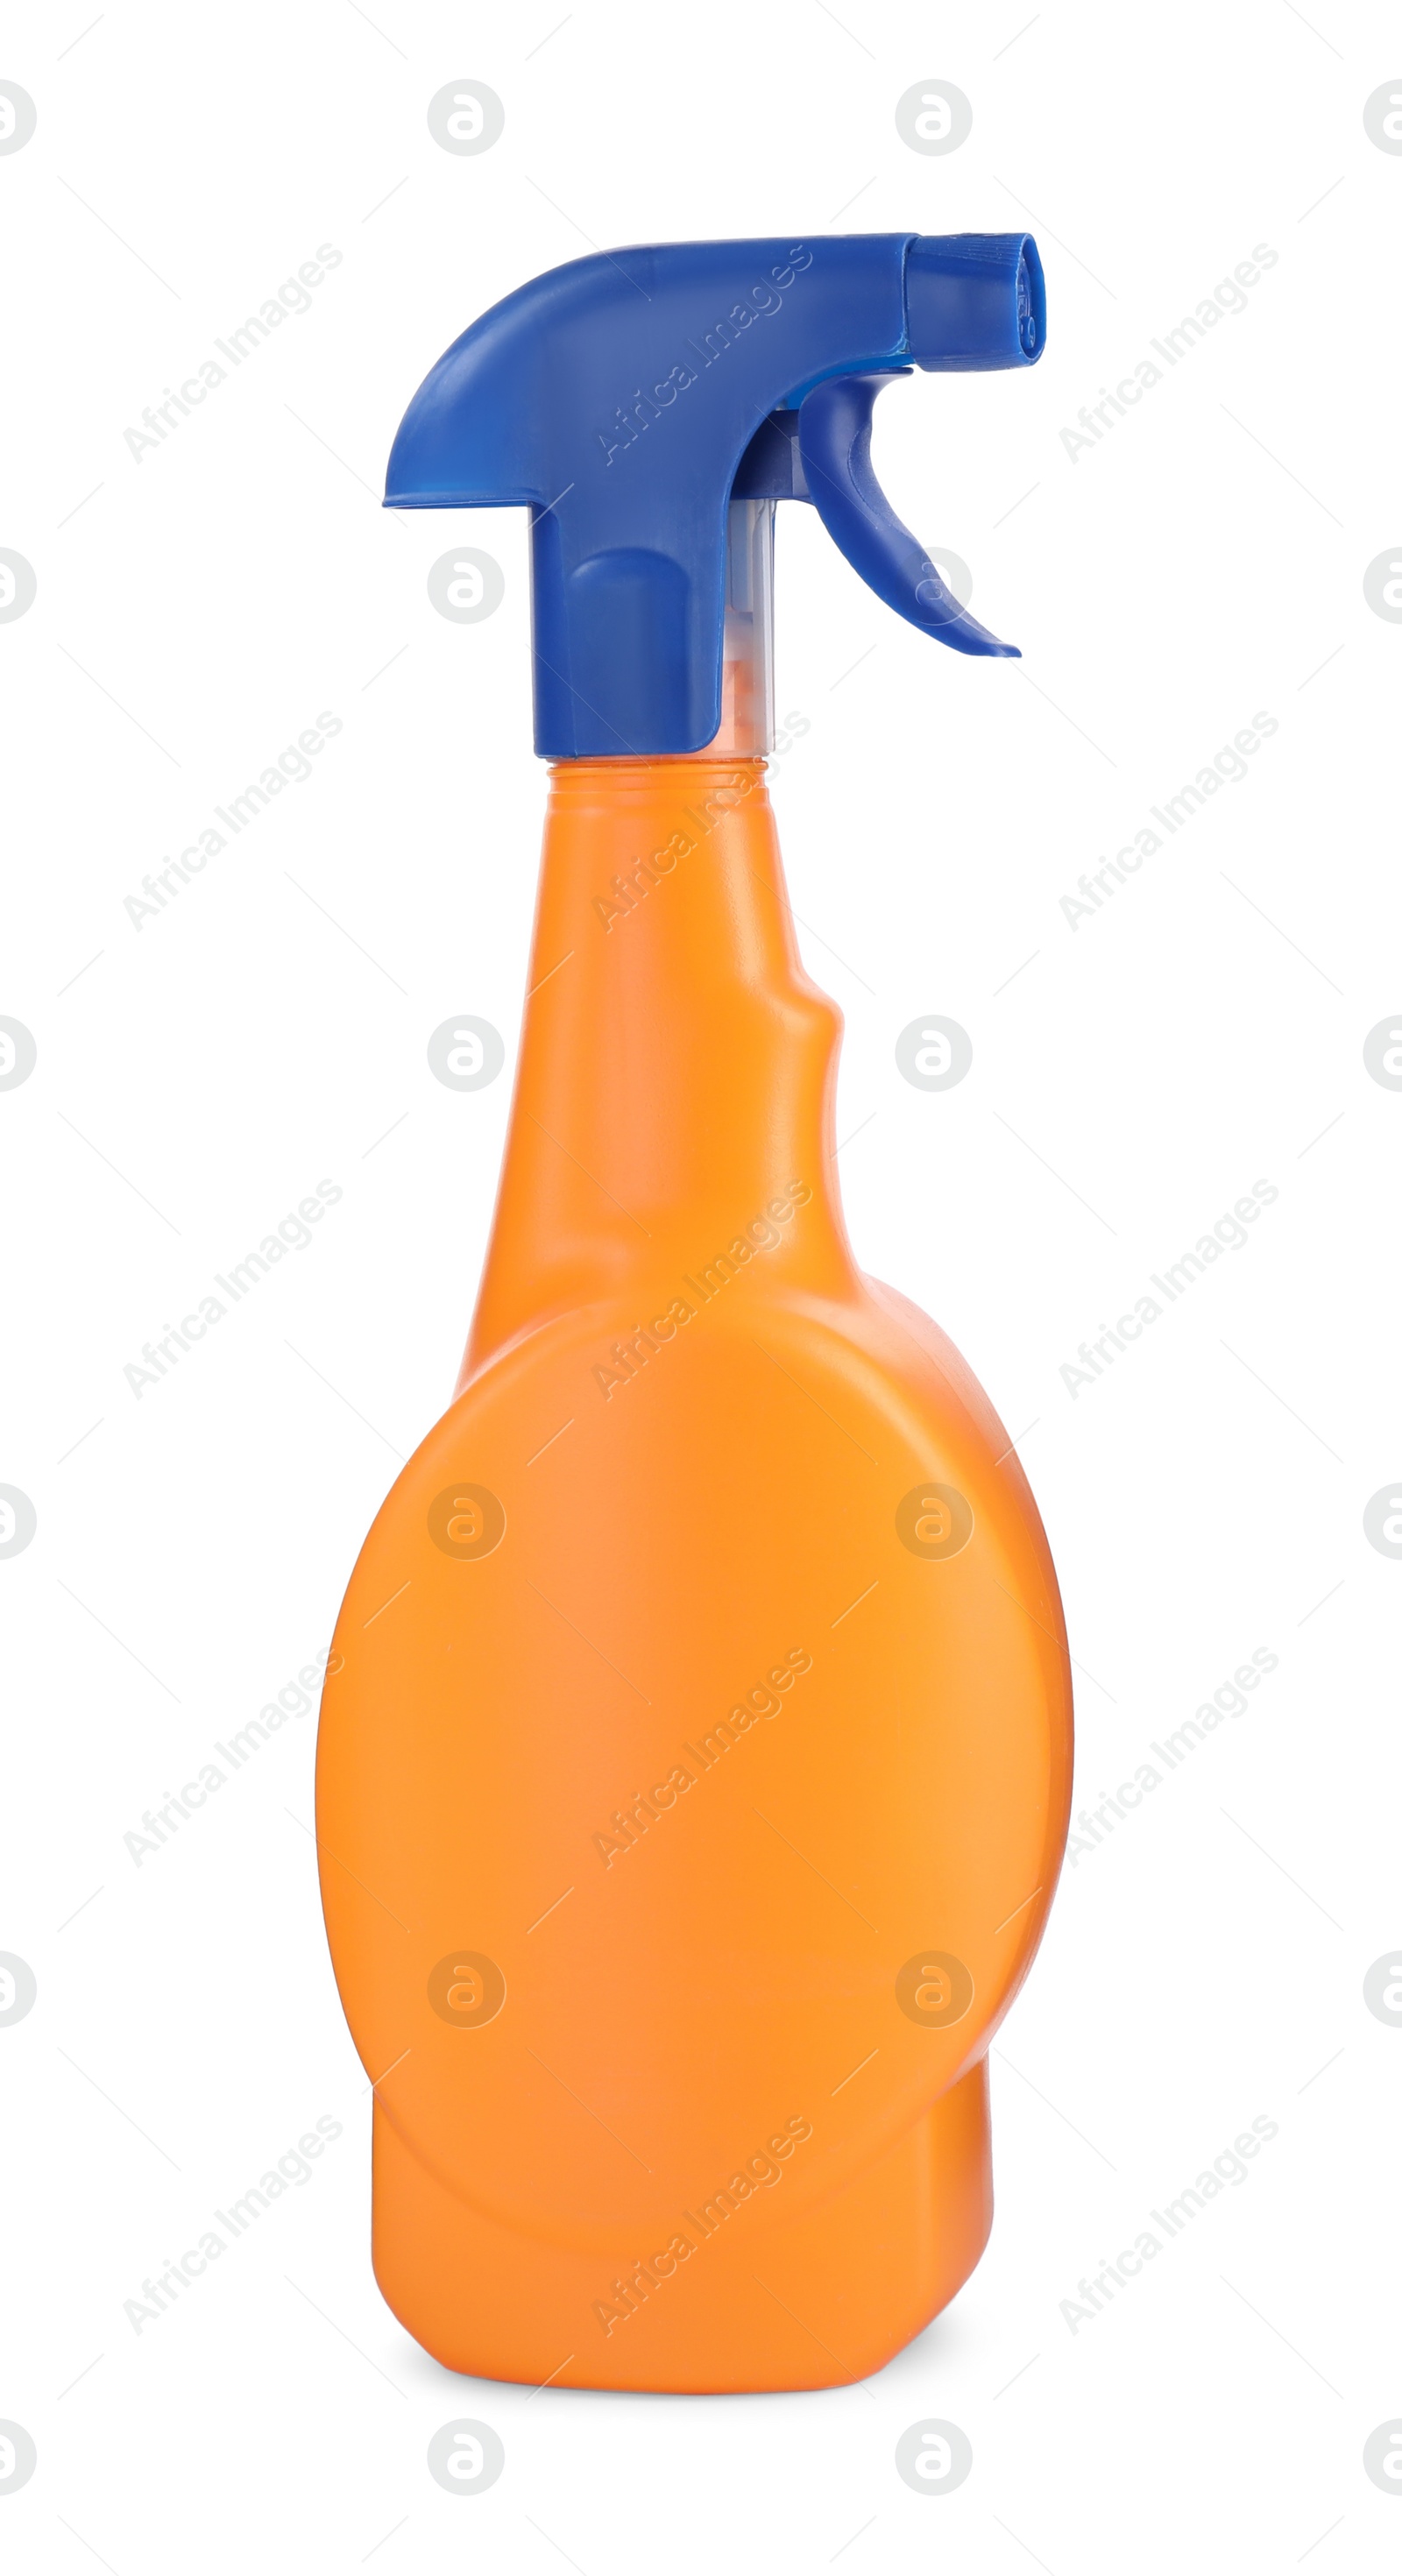 Photo of Spray bottle of cleaning product isolated on white